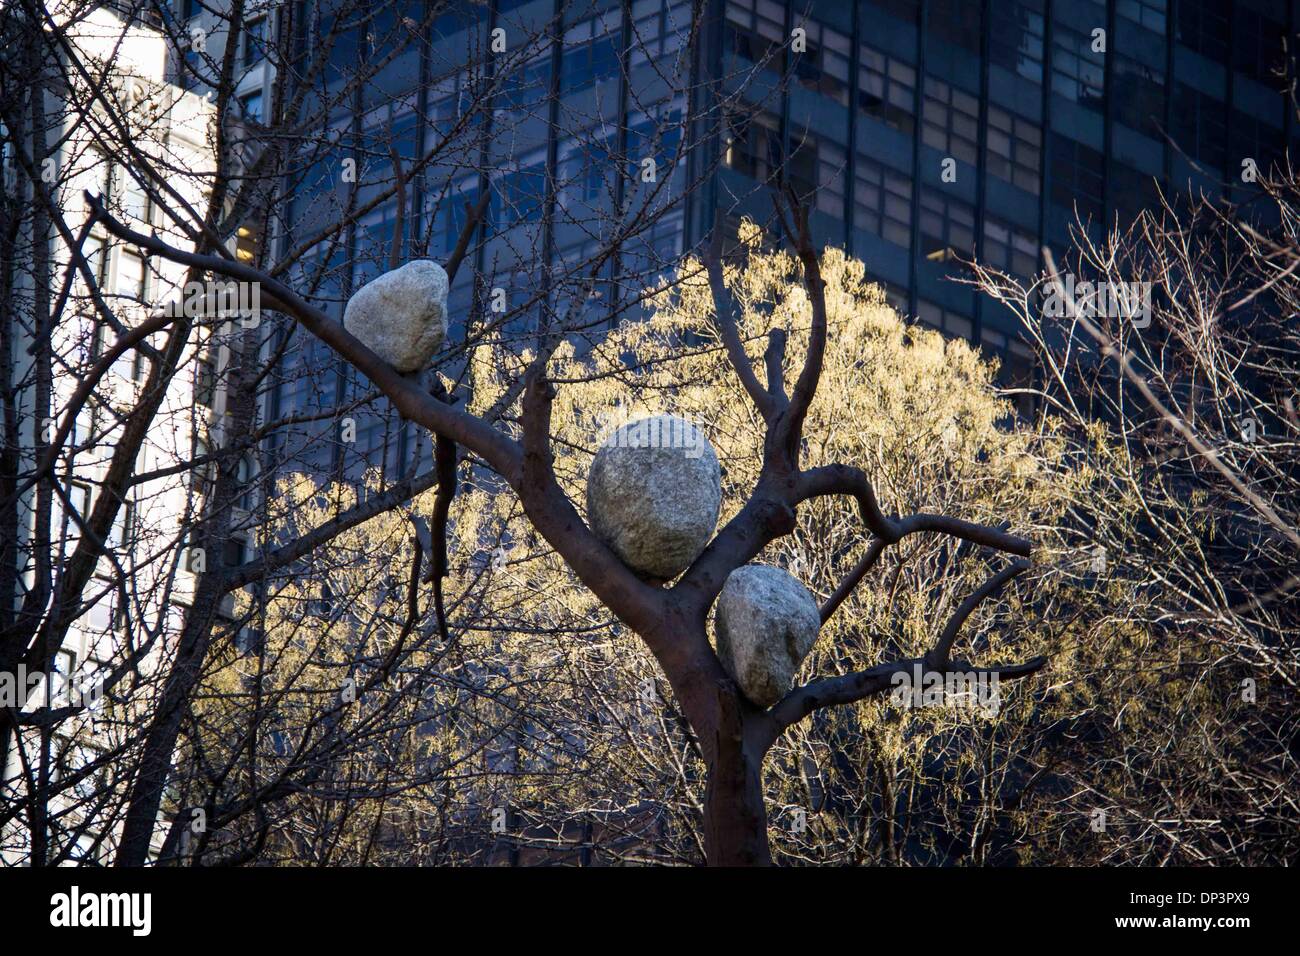 New York, Madison Square Park in New York. 7th Jan, 2014. A picture of one of the three bronze trees (with stones atop the arboreal branches) of Italian artist Giuseppe Penone's 'Ideas of Stone' installation, at Madison Square Park in New York, on Jan. 7, 2014. Penone, a member of the Italian Arte Povera movement, employs commonplace materials and natural forms in his exploration of the relationship between man and nature. © Niu Xiaolei/Xinhua/Alamy Live News Stock Photo